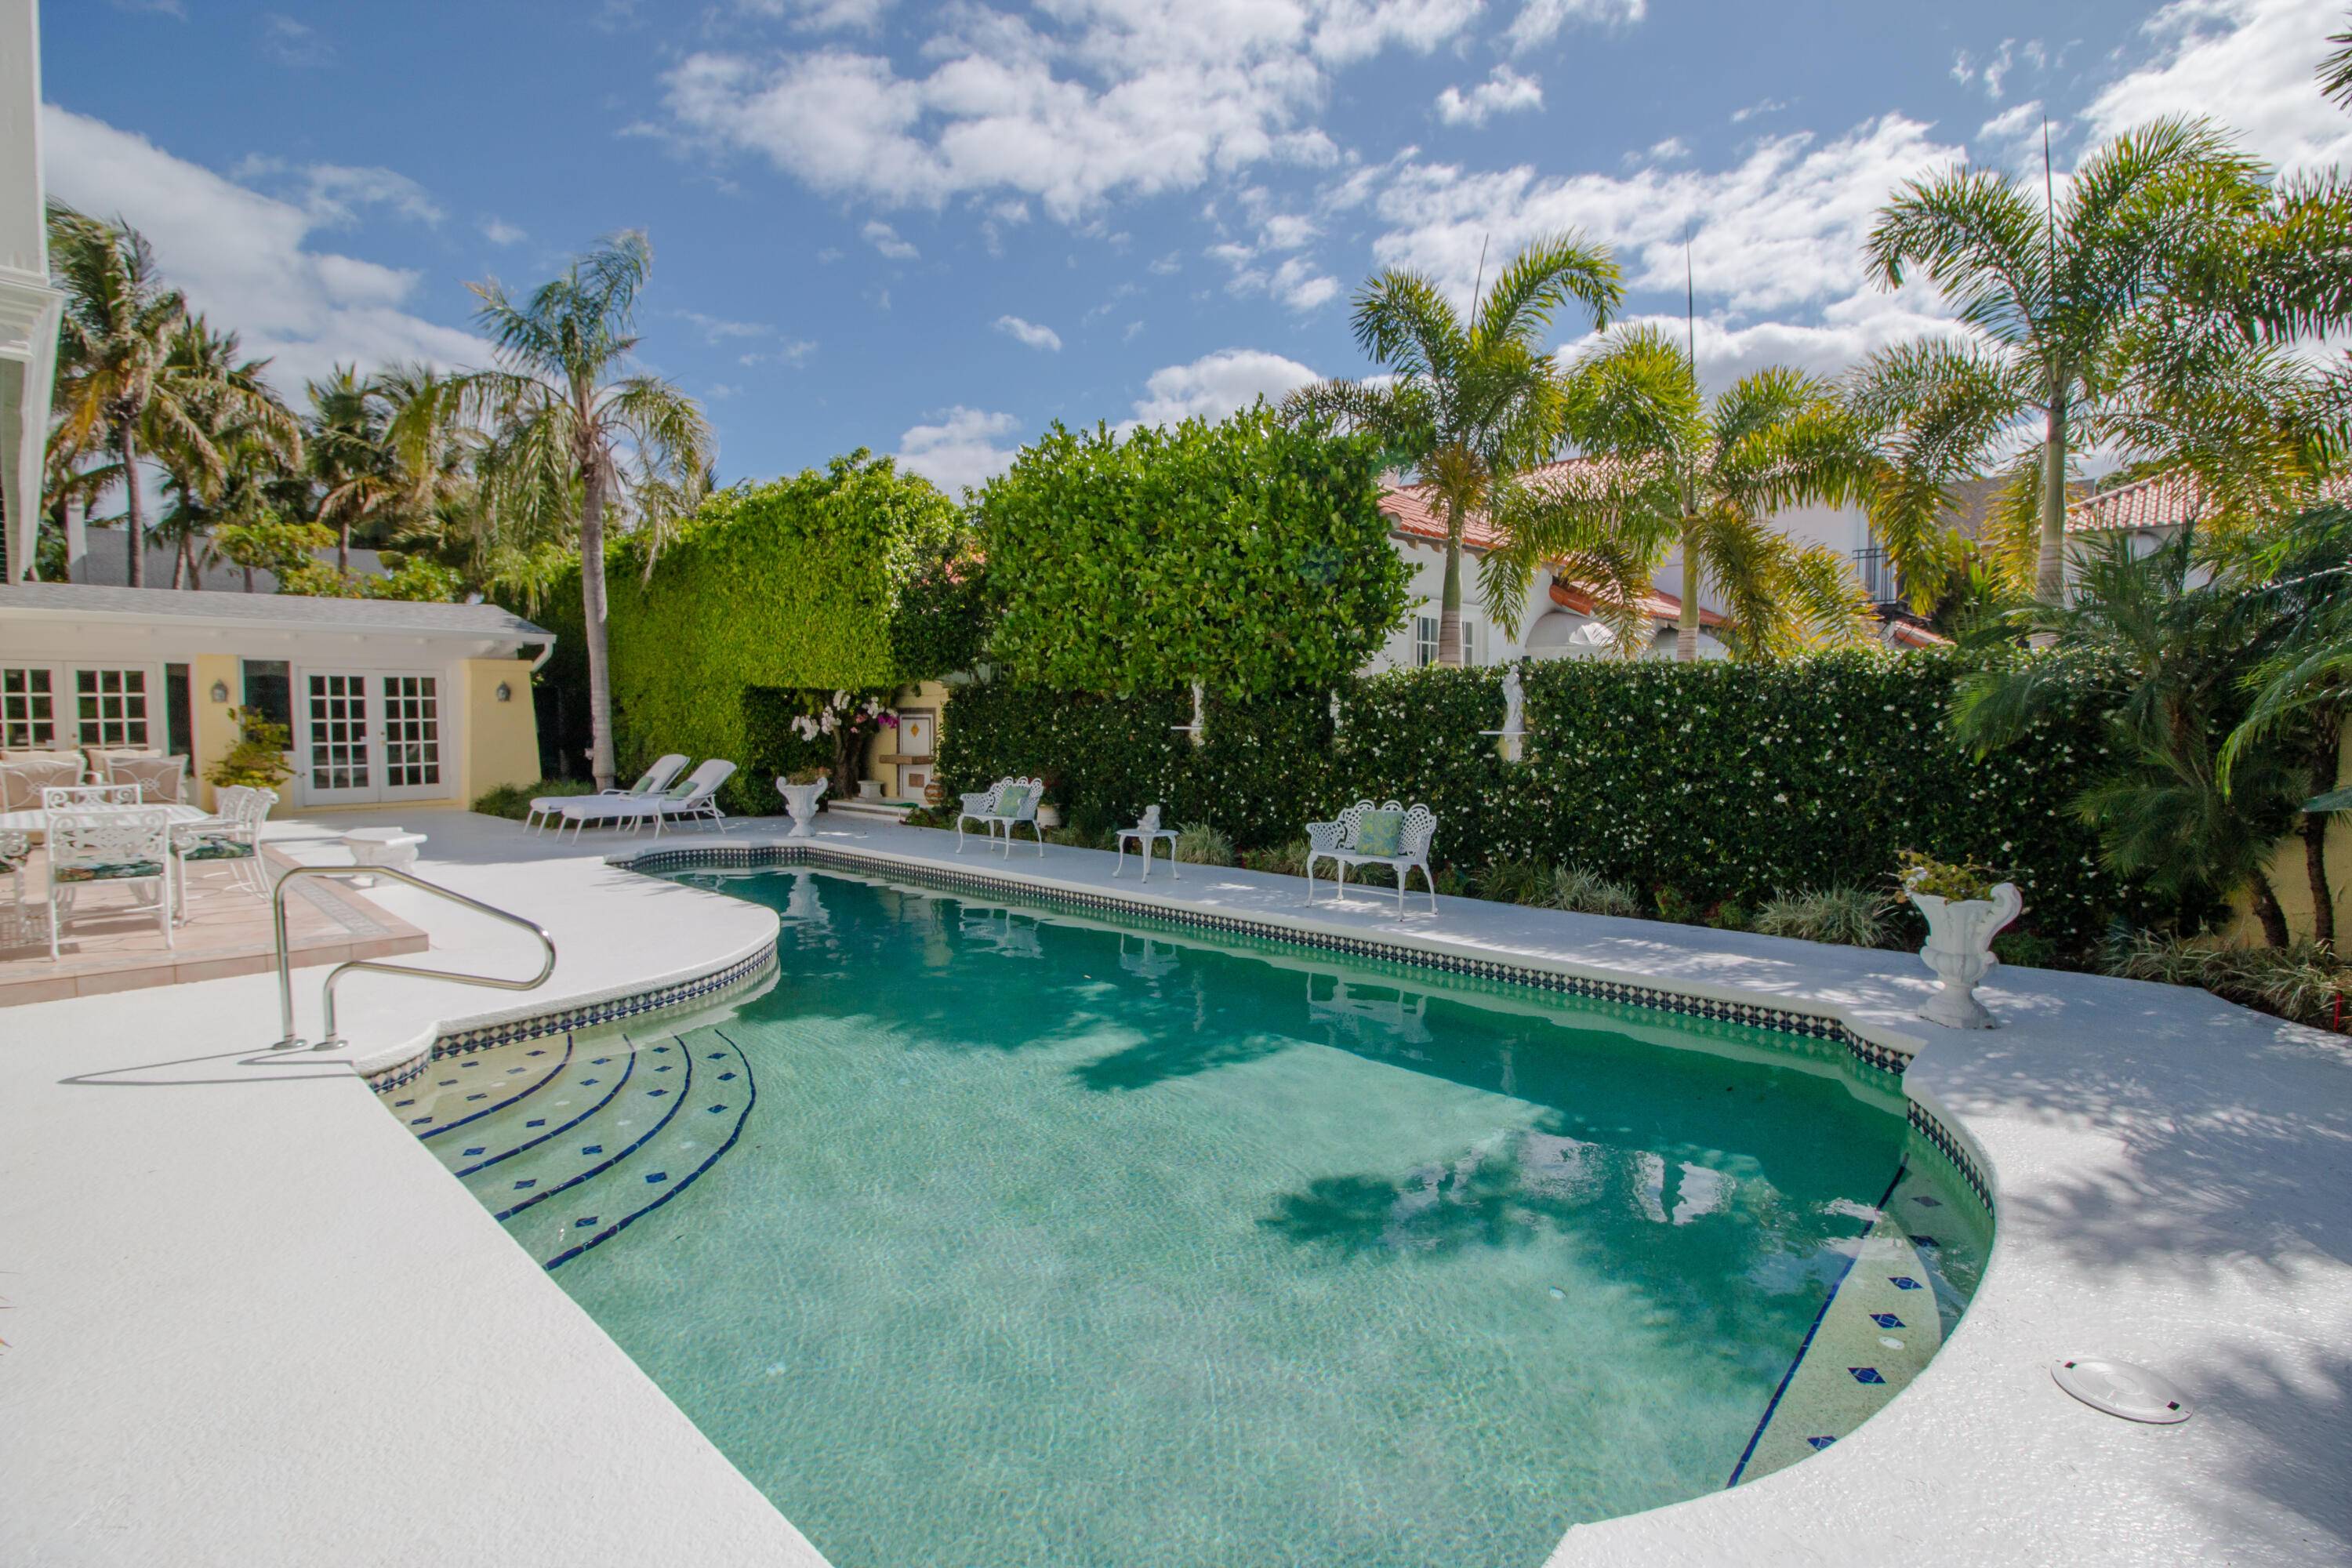 This home is located in one of the most desirable streets in Palm Beach.